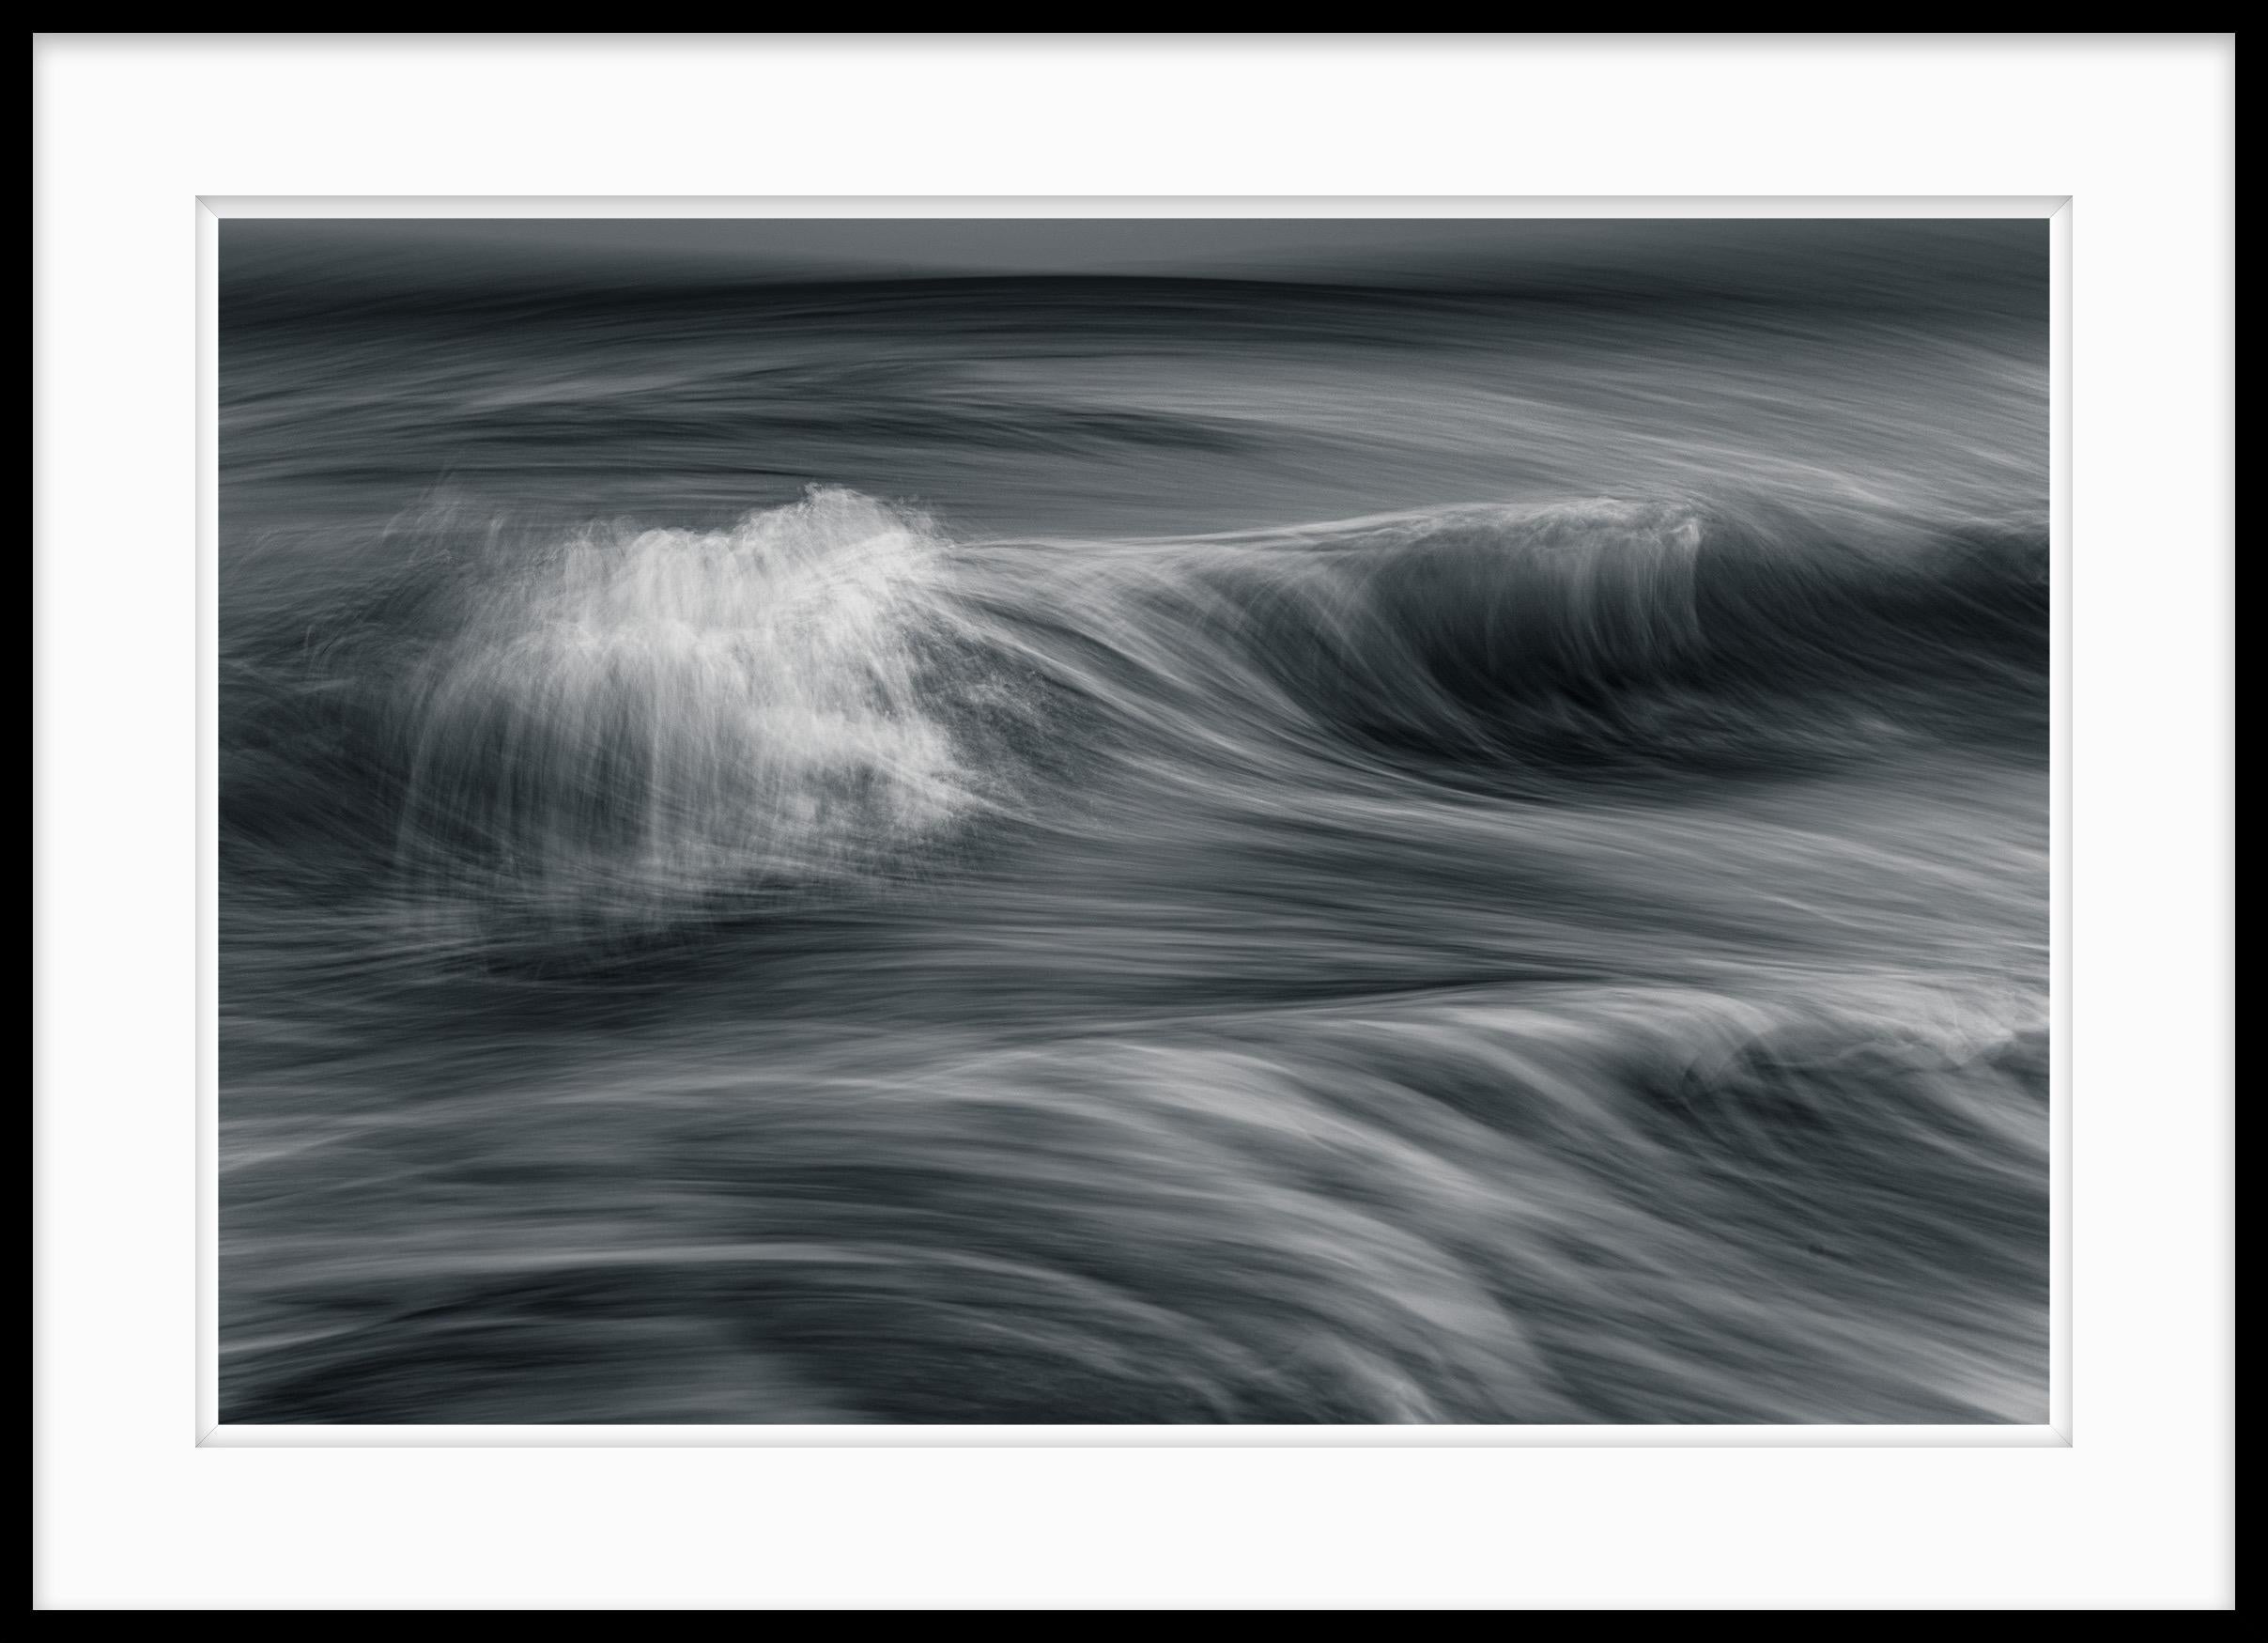 Limited Edition 1/7 Black and White Photograph 20x24 Waves, Ocean, Seascape #49 - Gray Landscape Photograph by Howard Lewis